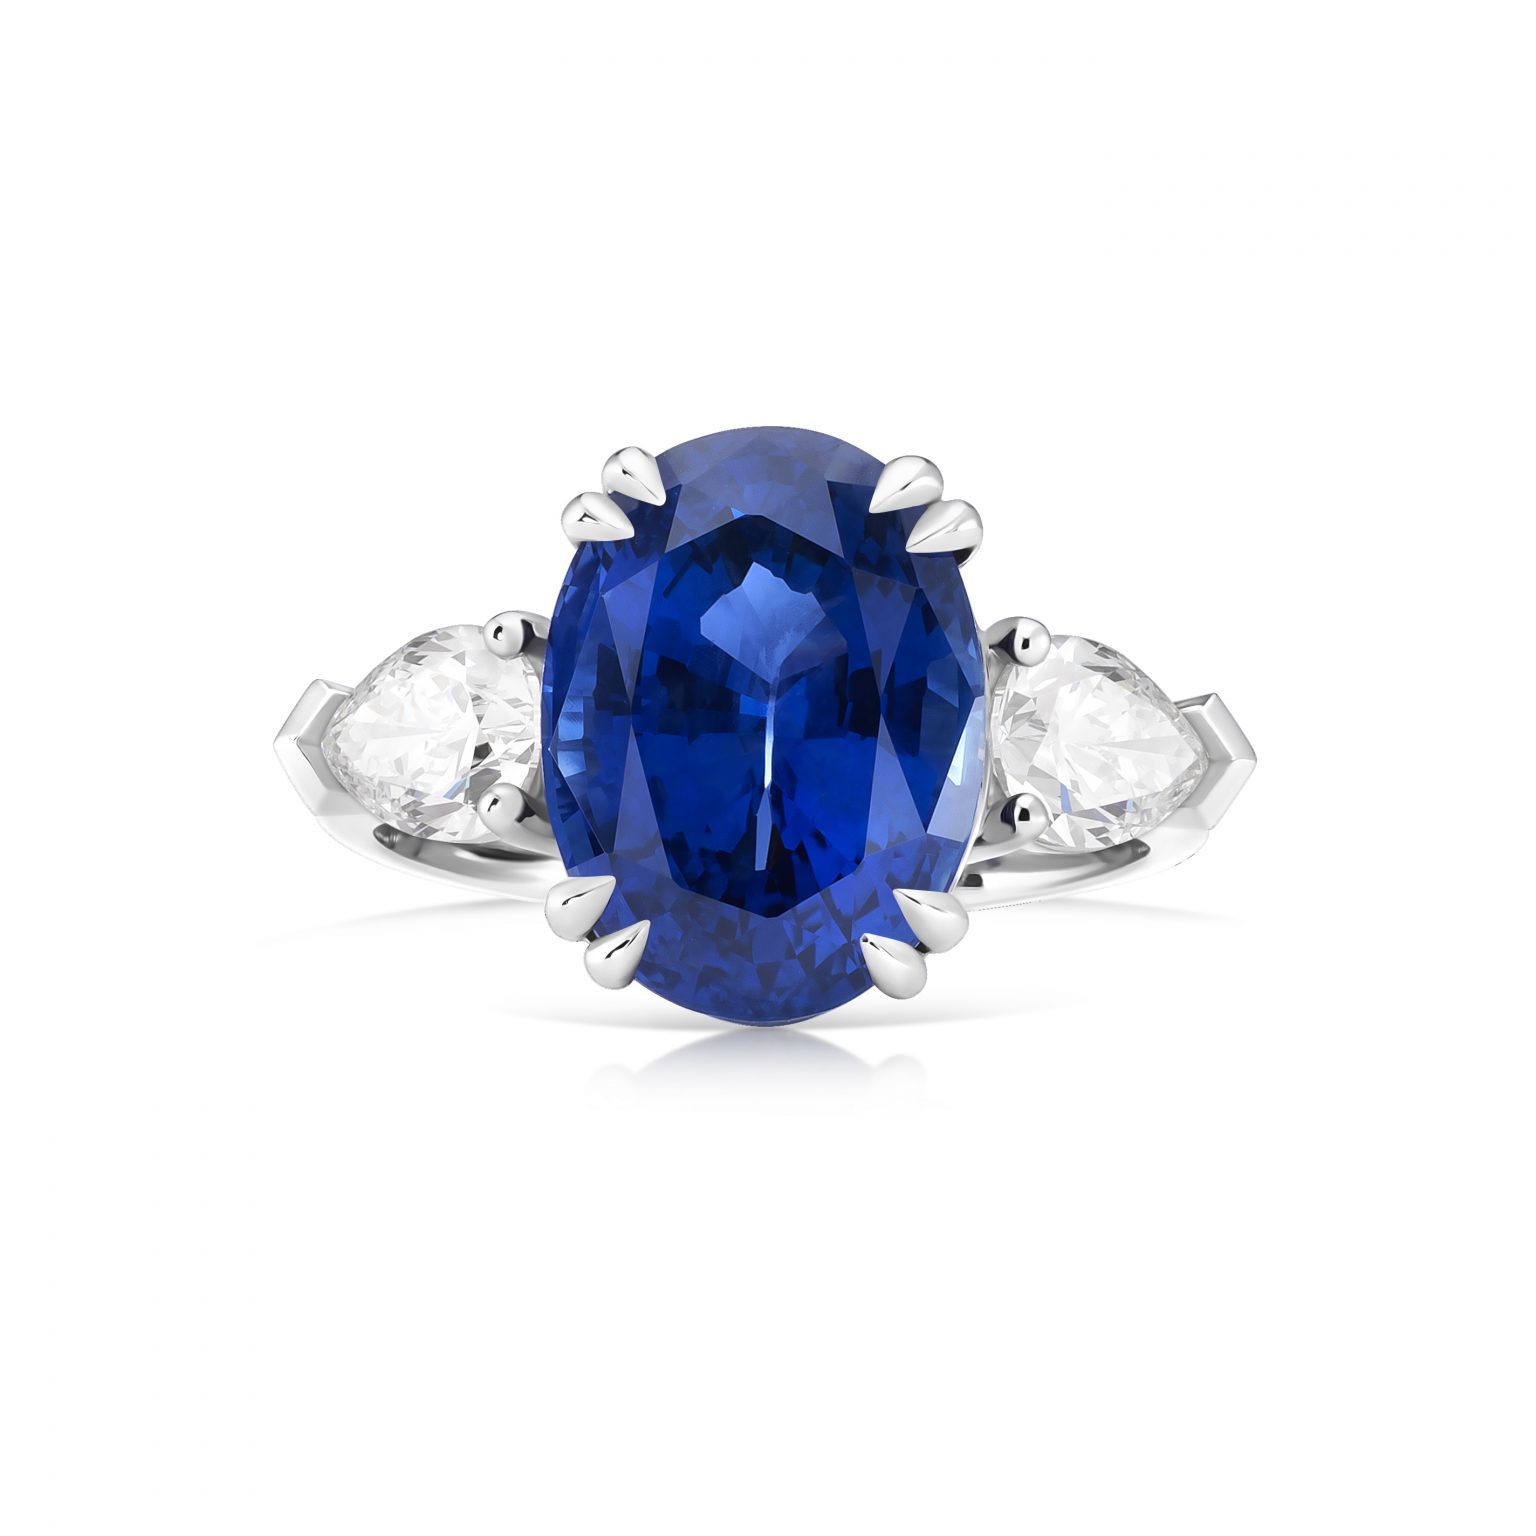 3.17 ct Oval Sapphire Ring with Pear Diamonds